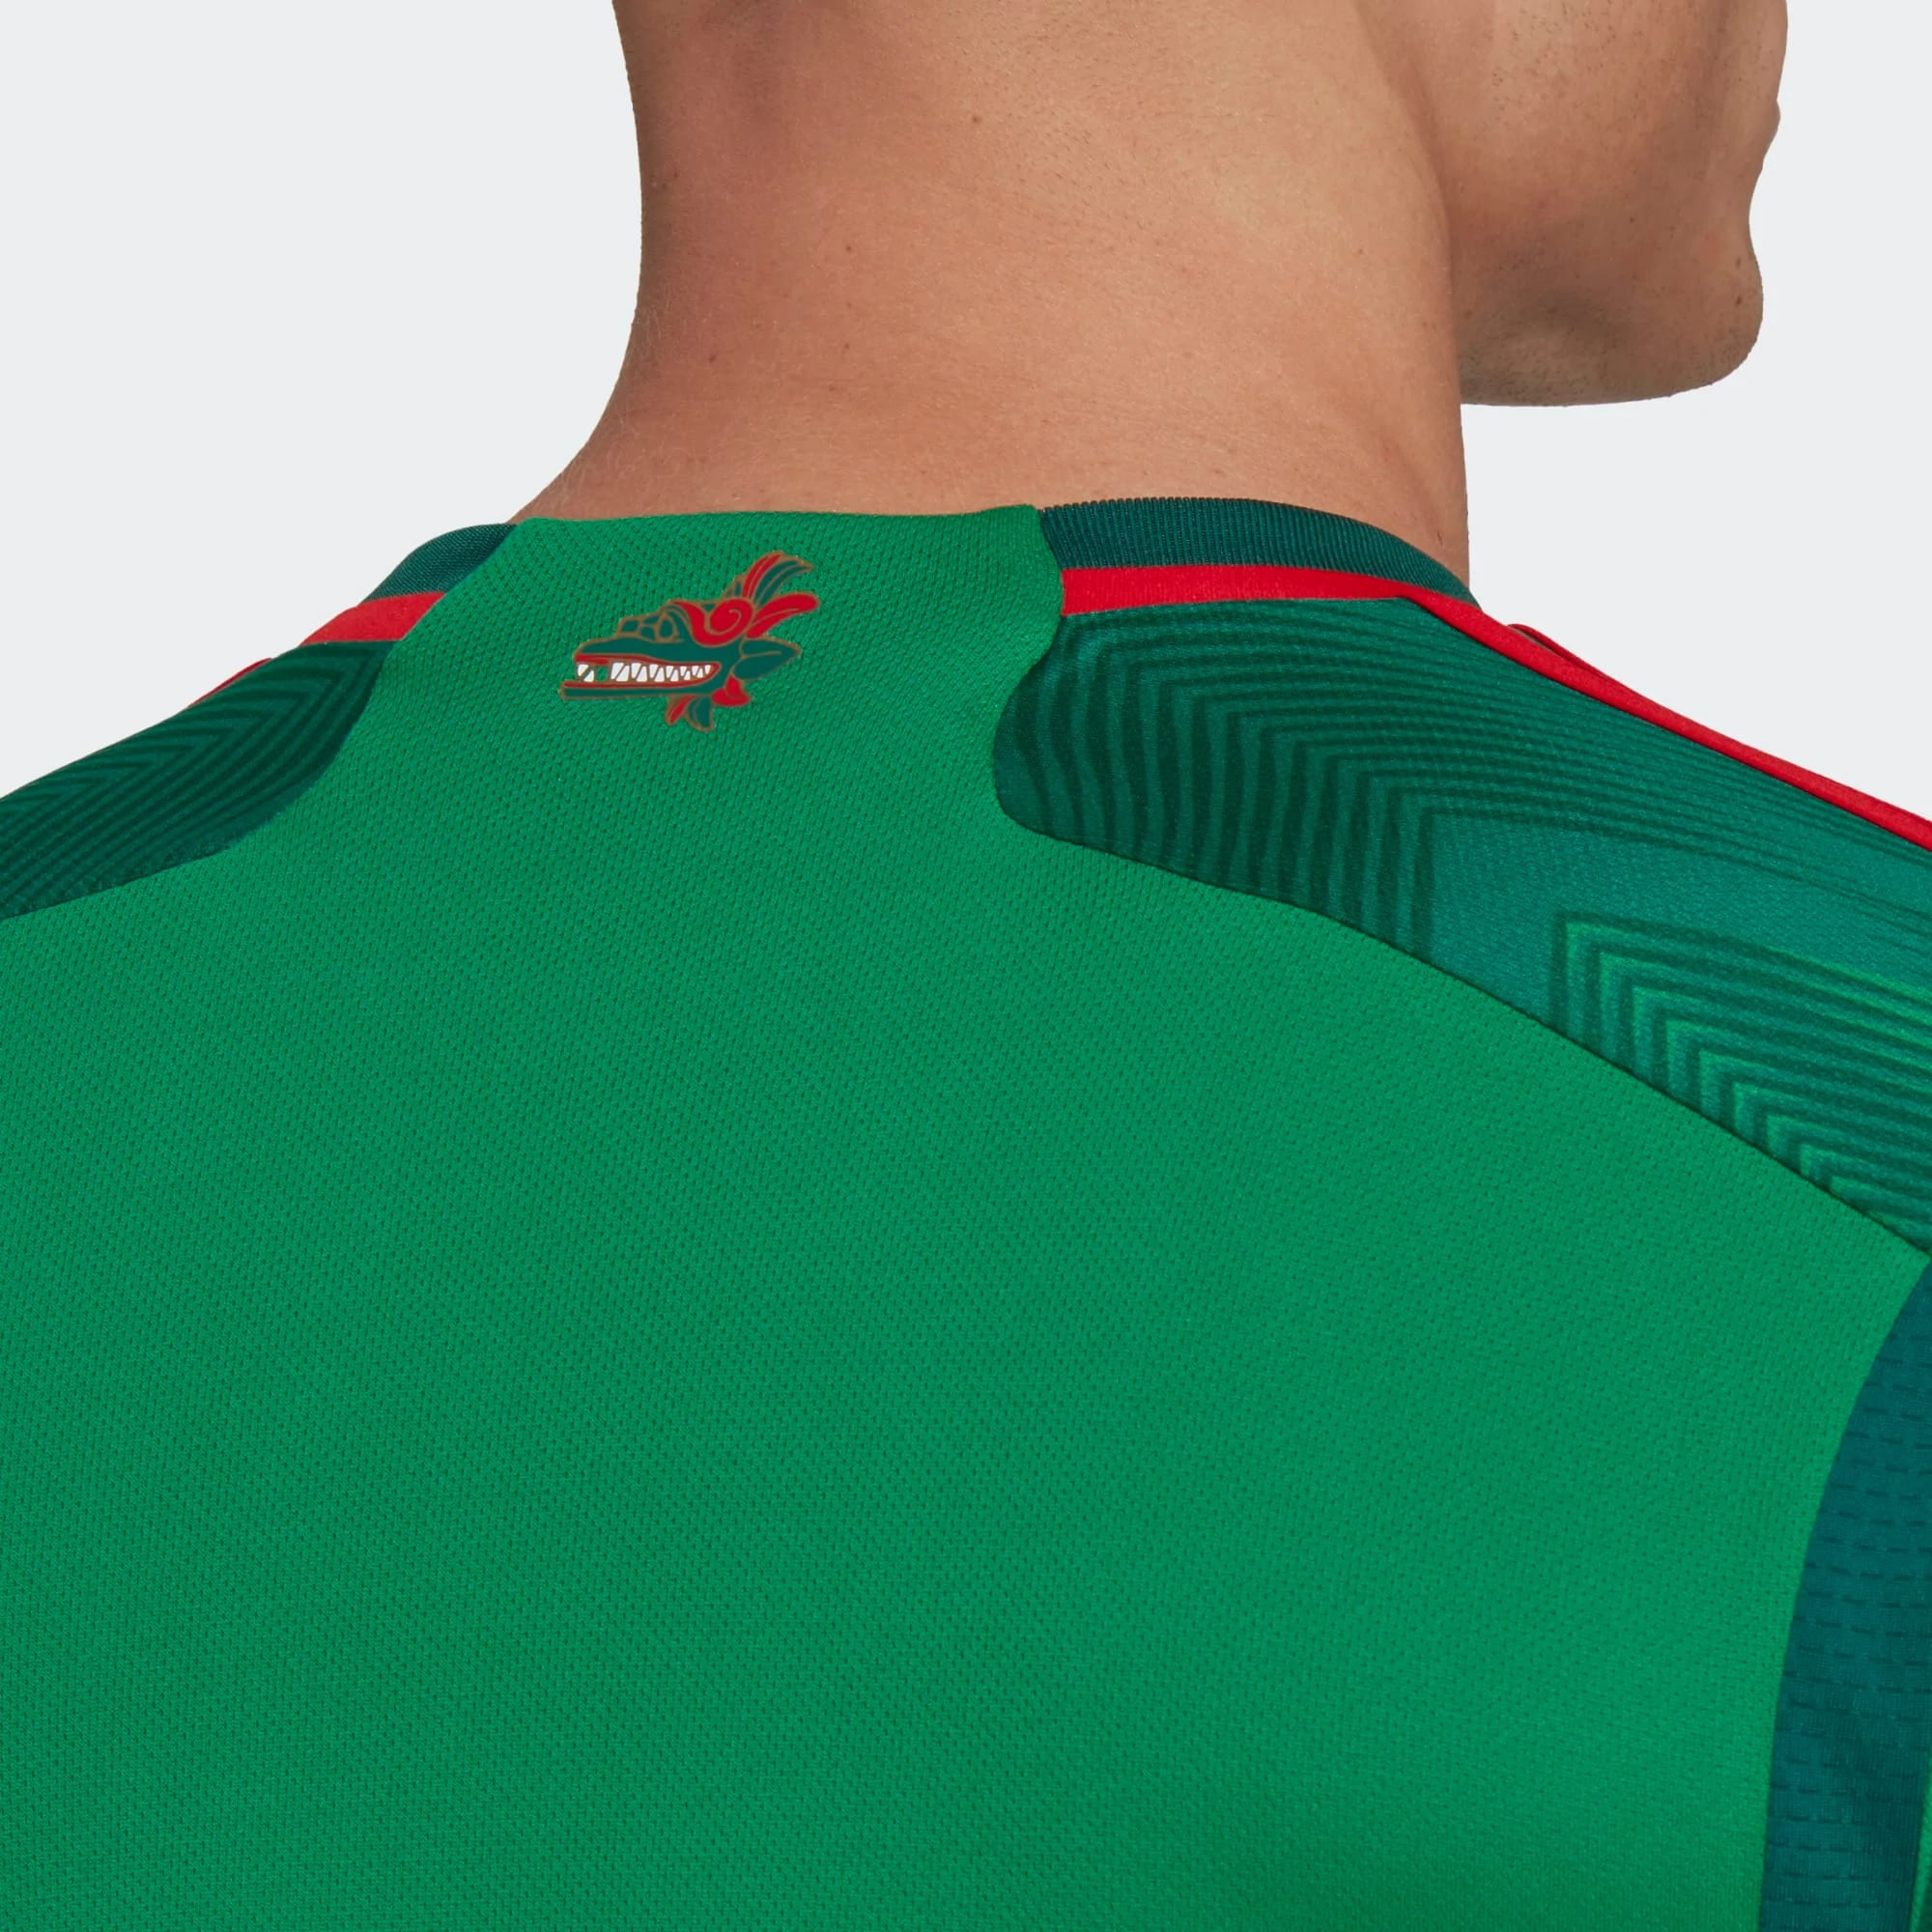 mexico world cup jersey custom